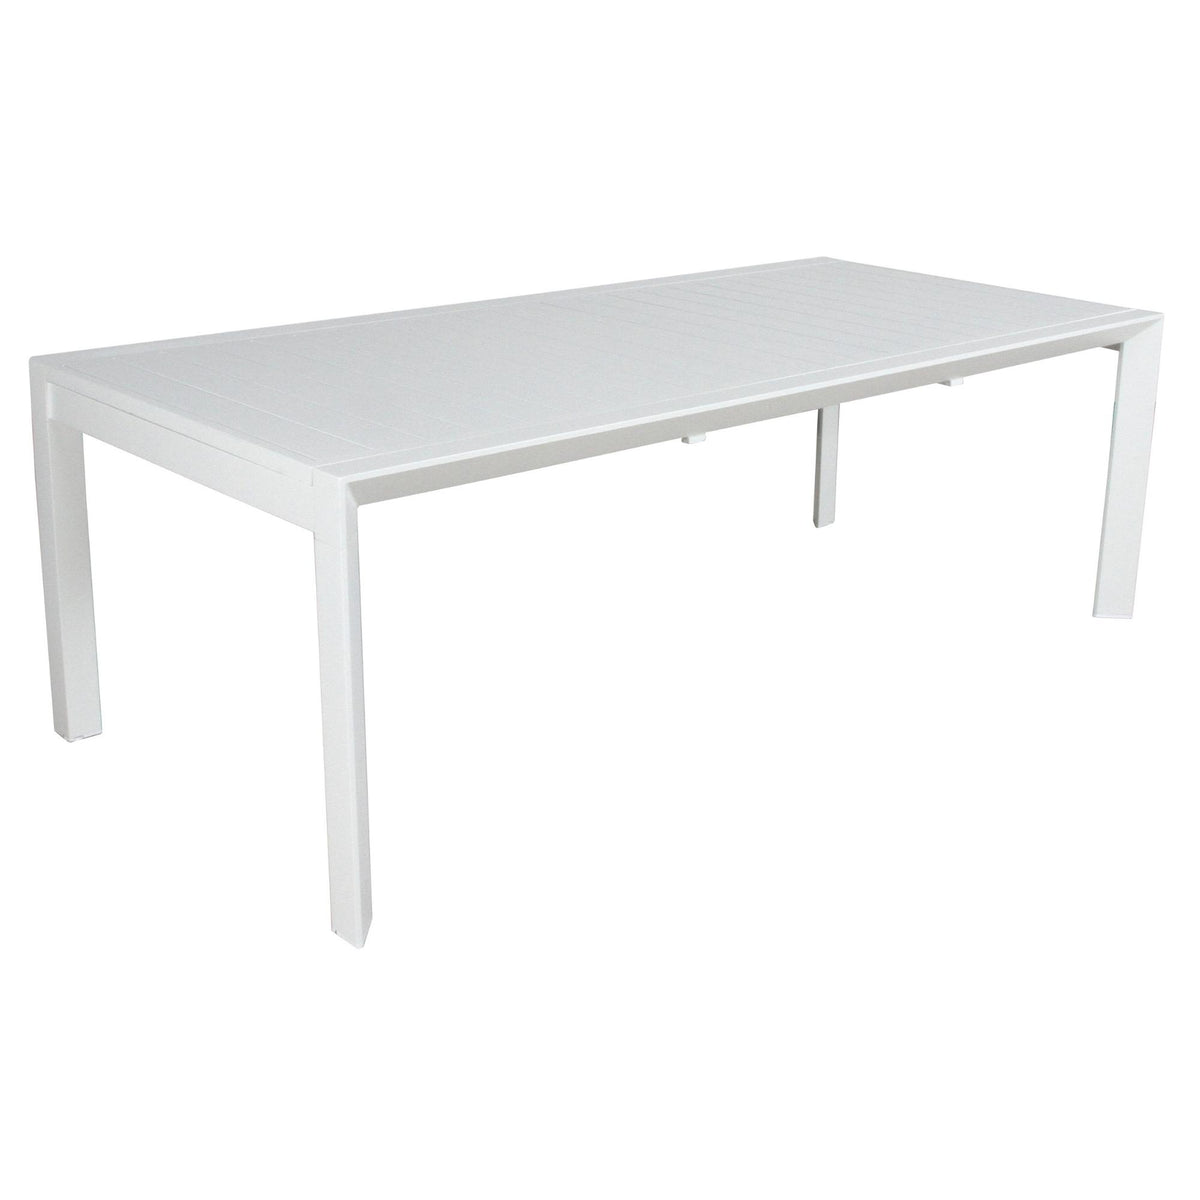 Iberia 178cm Outdoor Dining Table White 